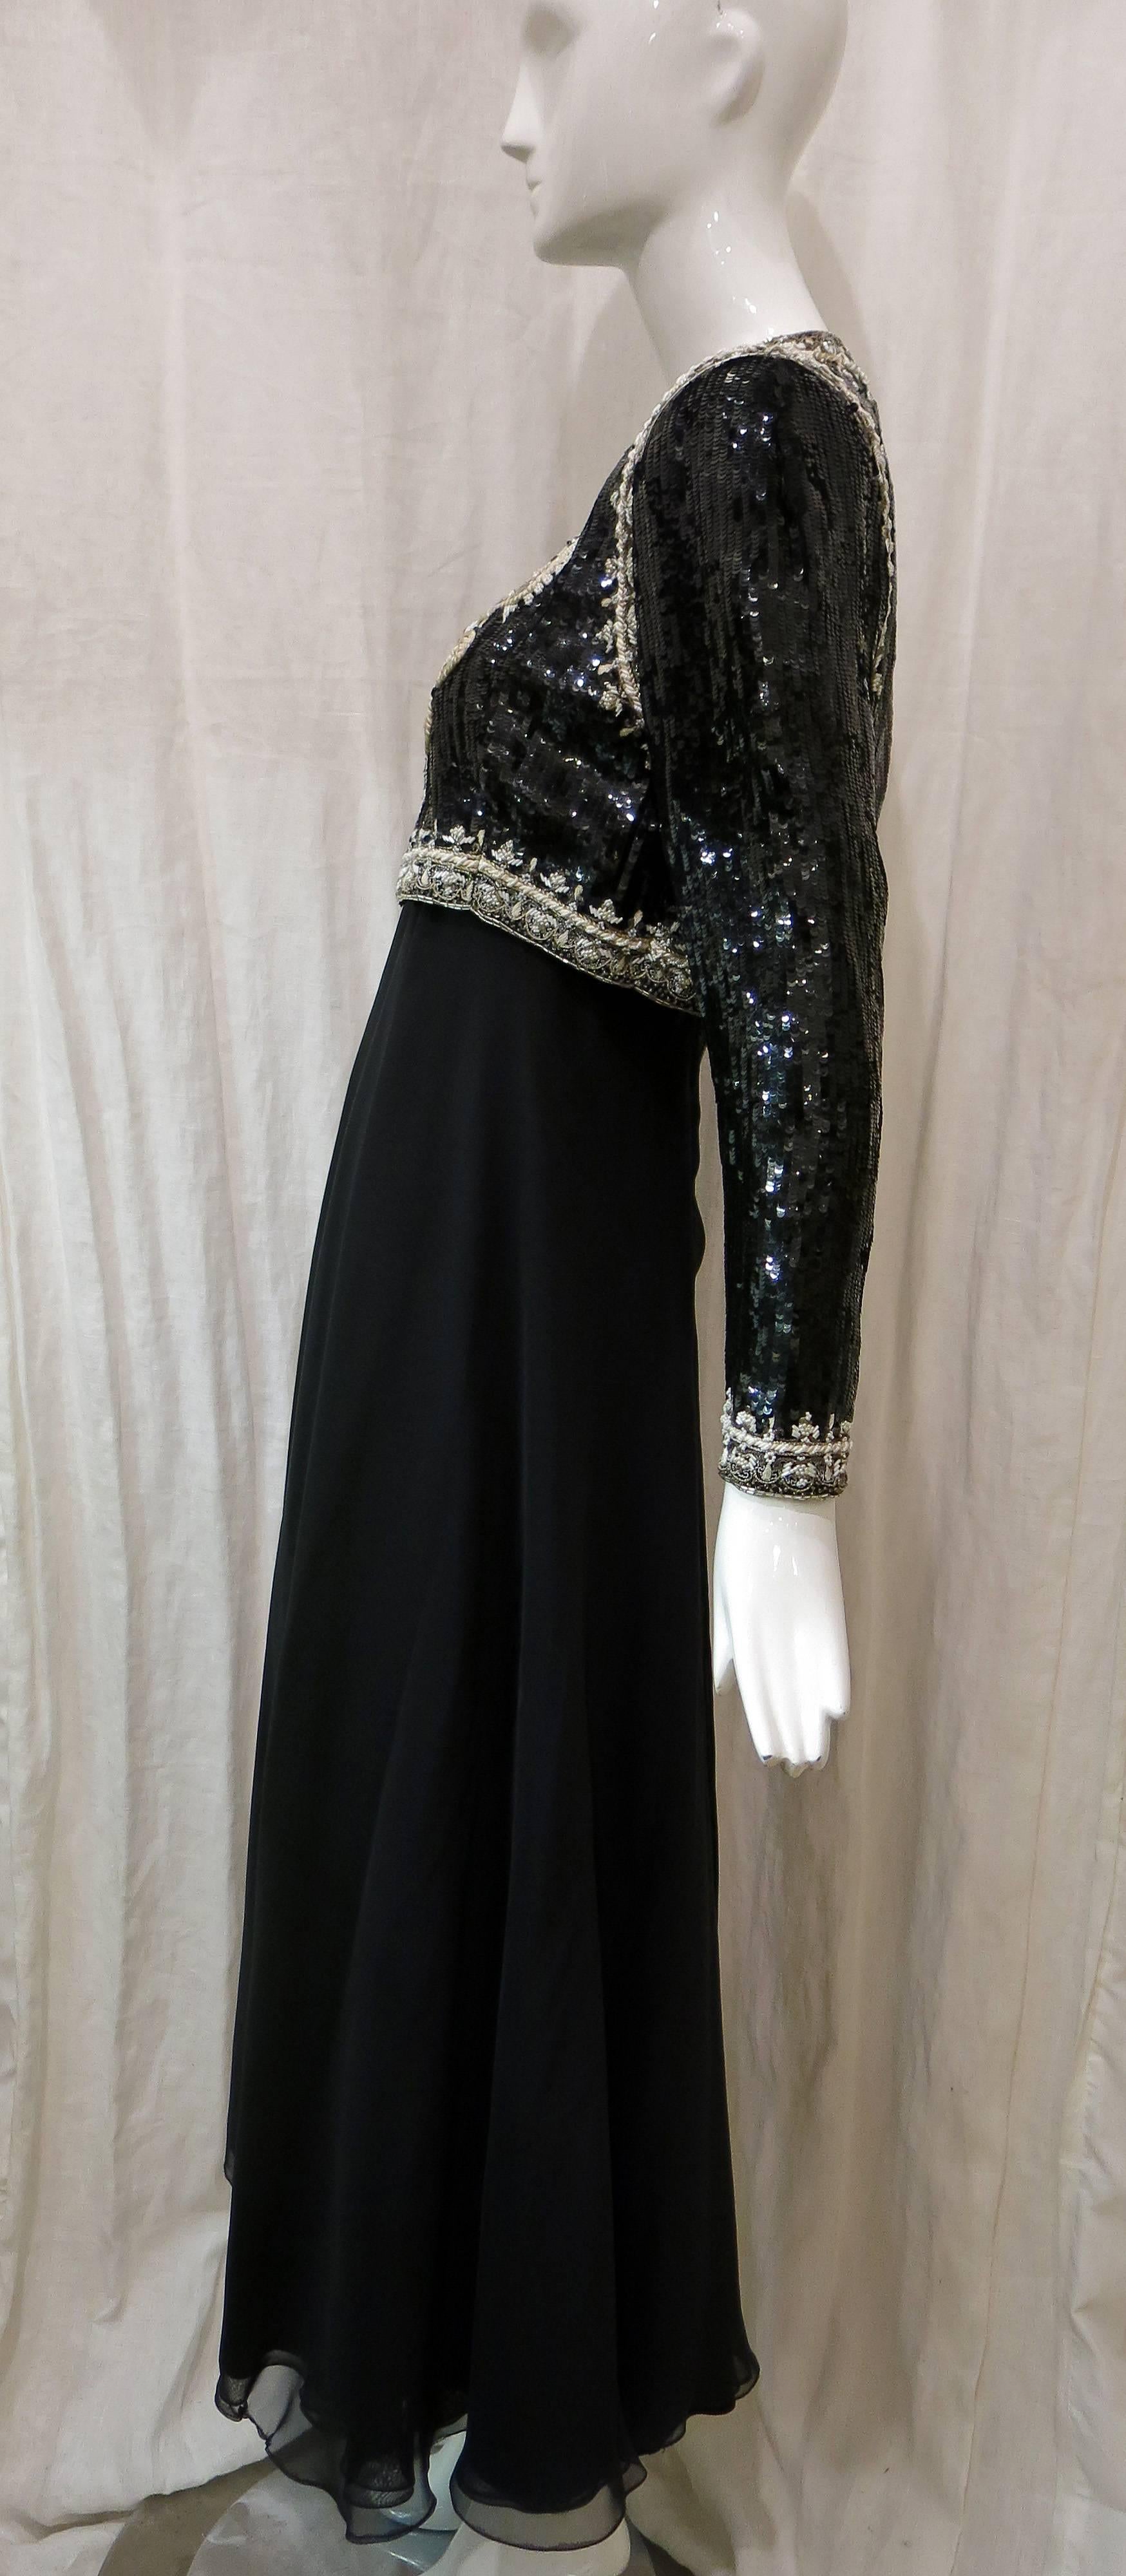 Cropped sequin jacket hits right at wrists. Single hook and eye closure at neckline. Black silver and white beading. Paisley design at front. Dress has spaghetti straps and sequin bodice in the style of the jacket. Asymmetric hi-low hem. Front hits